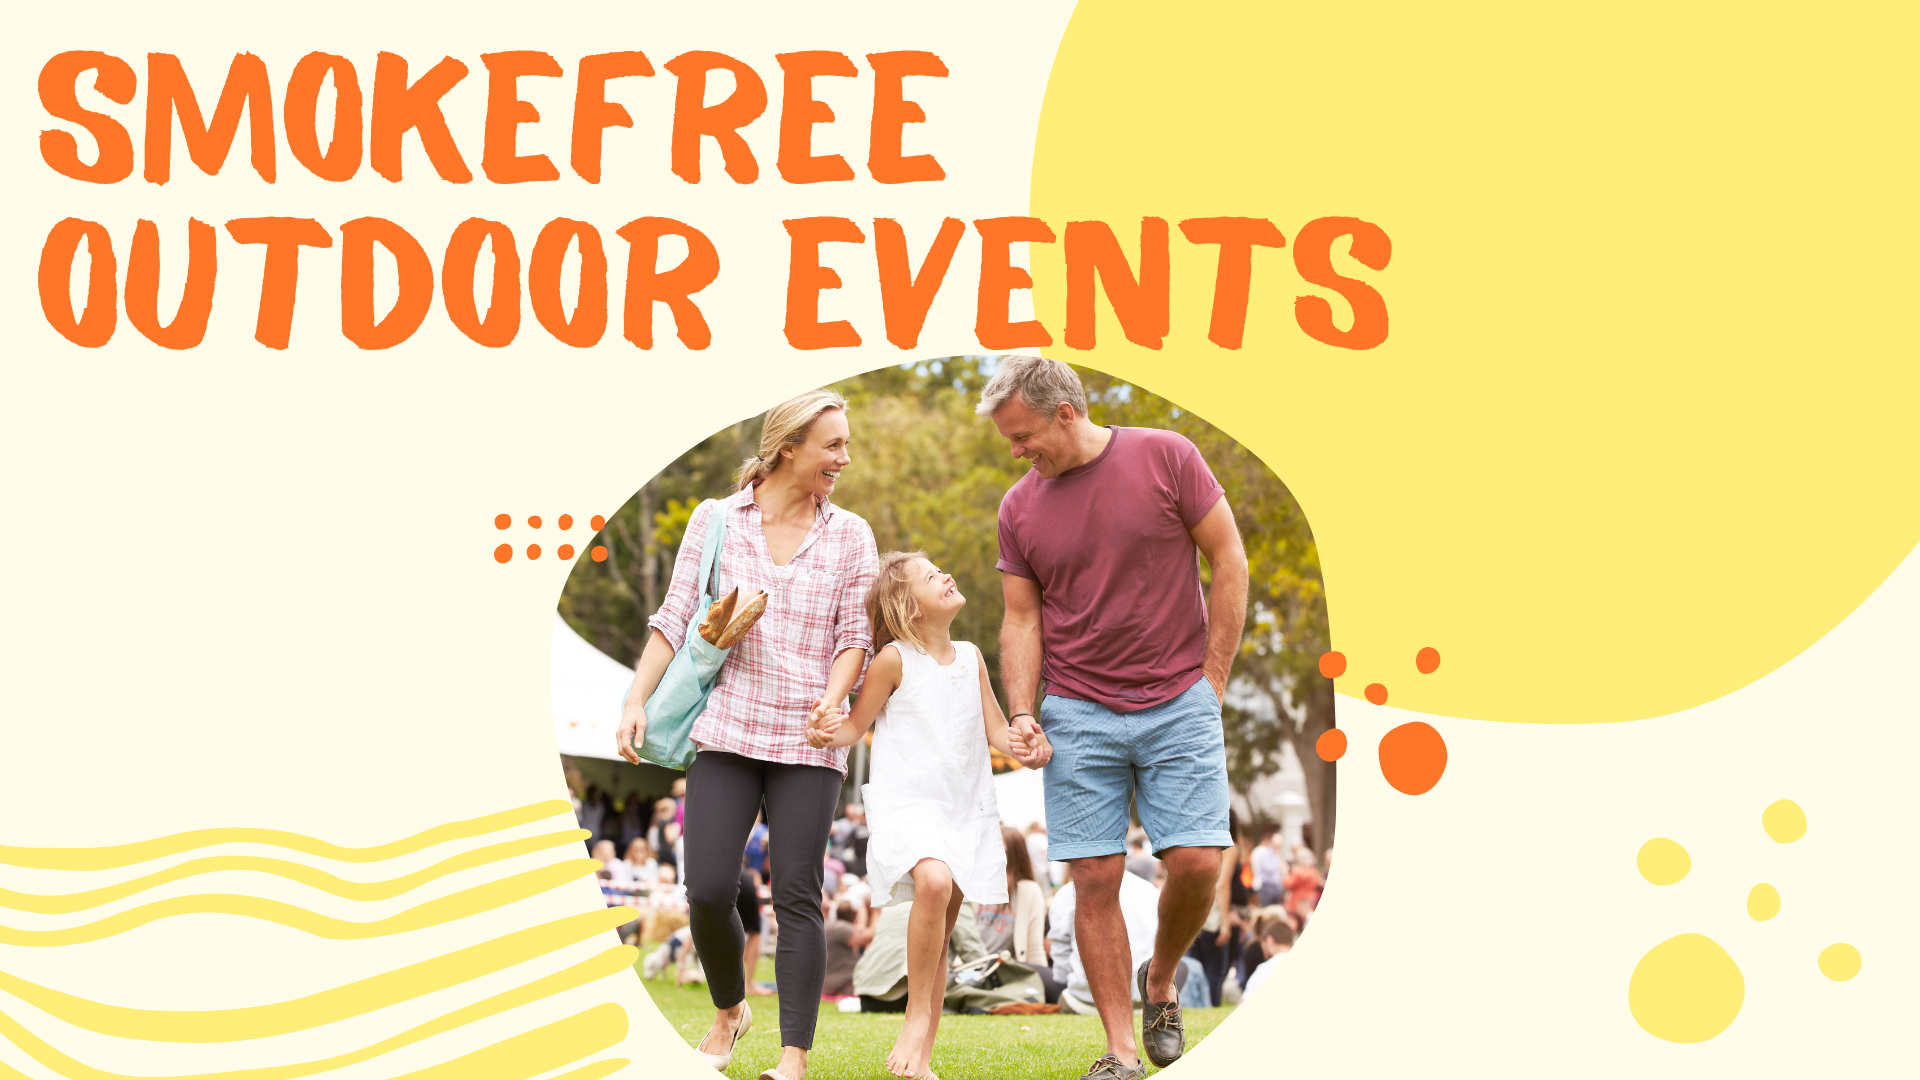 The words, 'Smokefree outdoor events,' over an image of a white woman, man, and child strolling outside.